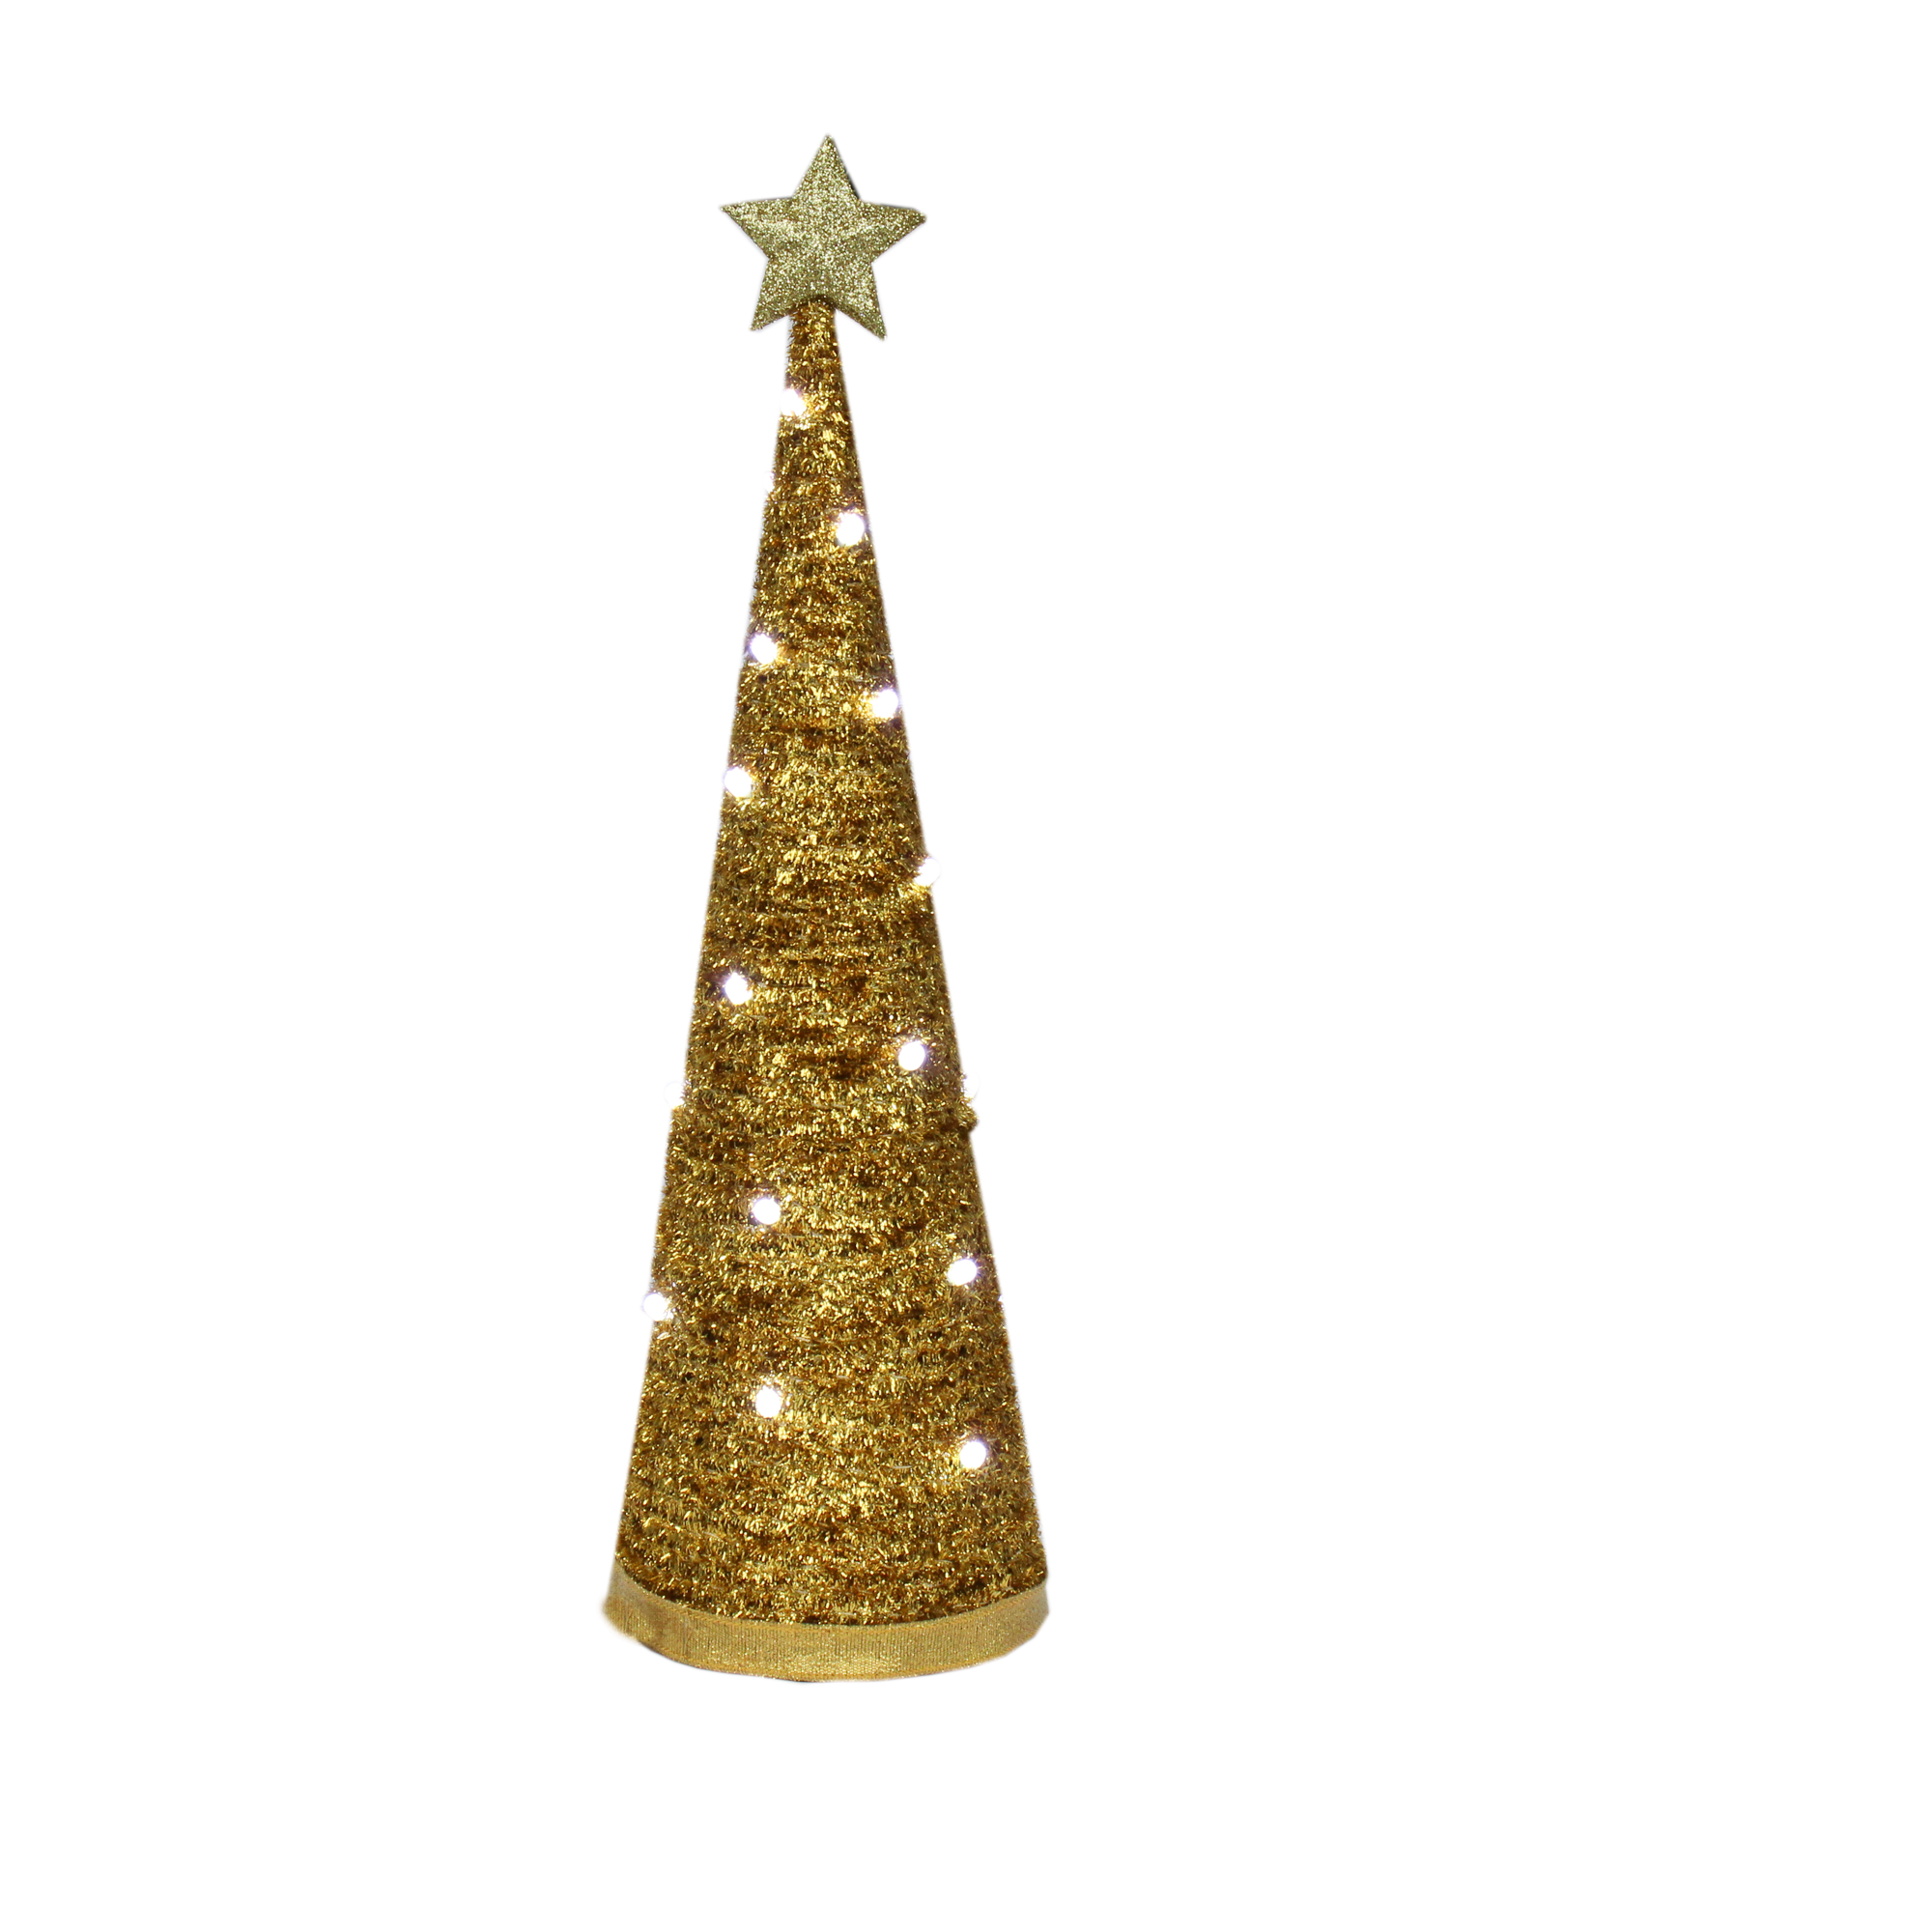 Handmade Conical Christmas Tinsel Tree with LED Light, 14.5 X 4inch, Gold, 1pc